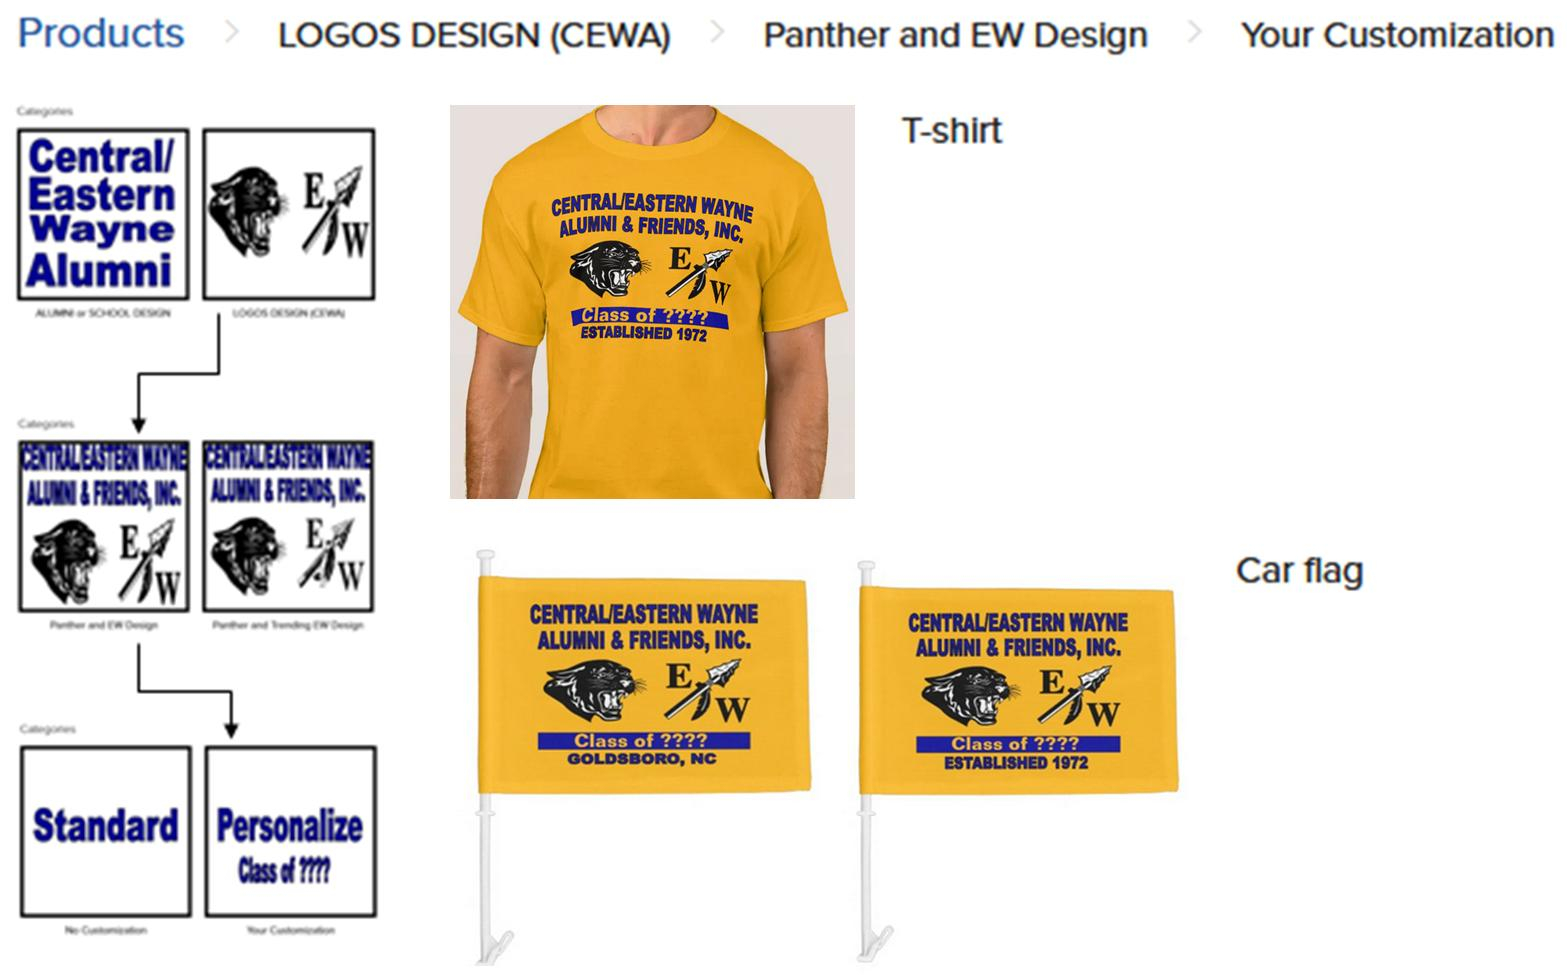 Products -> LOGOS DESIGN (CEWA) -> Panther and EW Design -> Your Customization